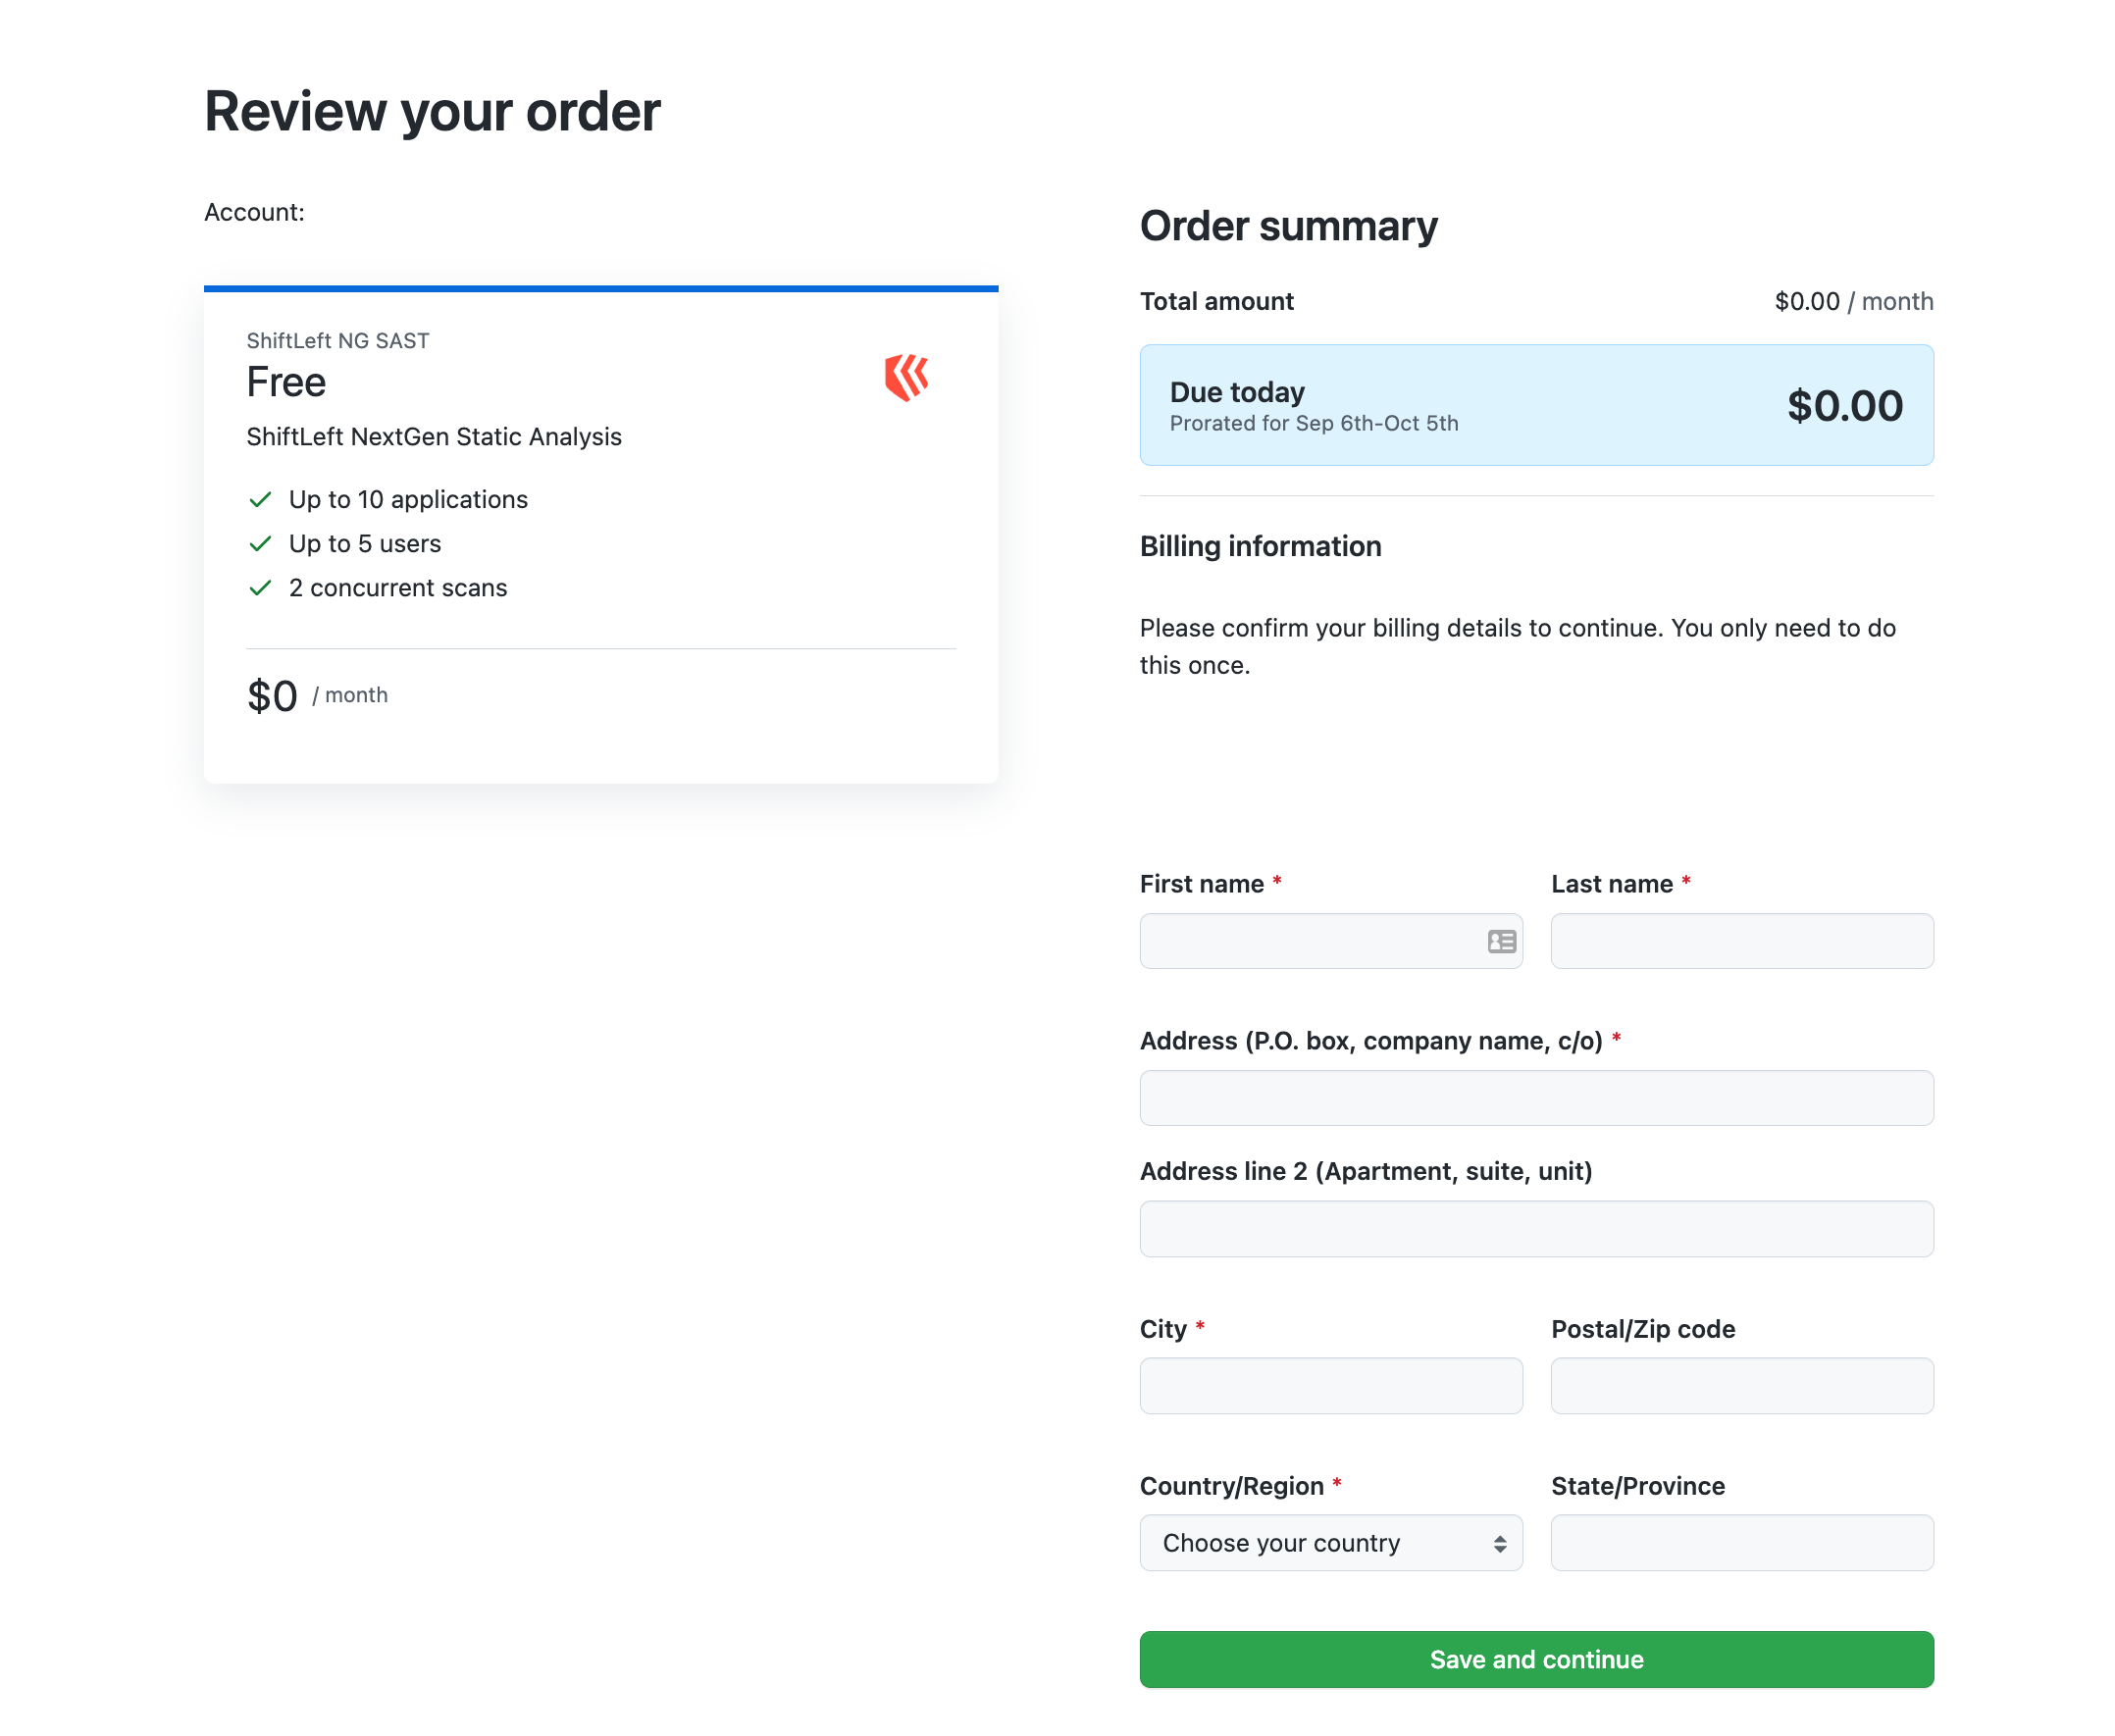 Review your order